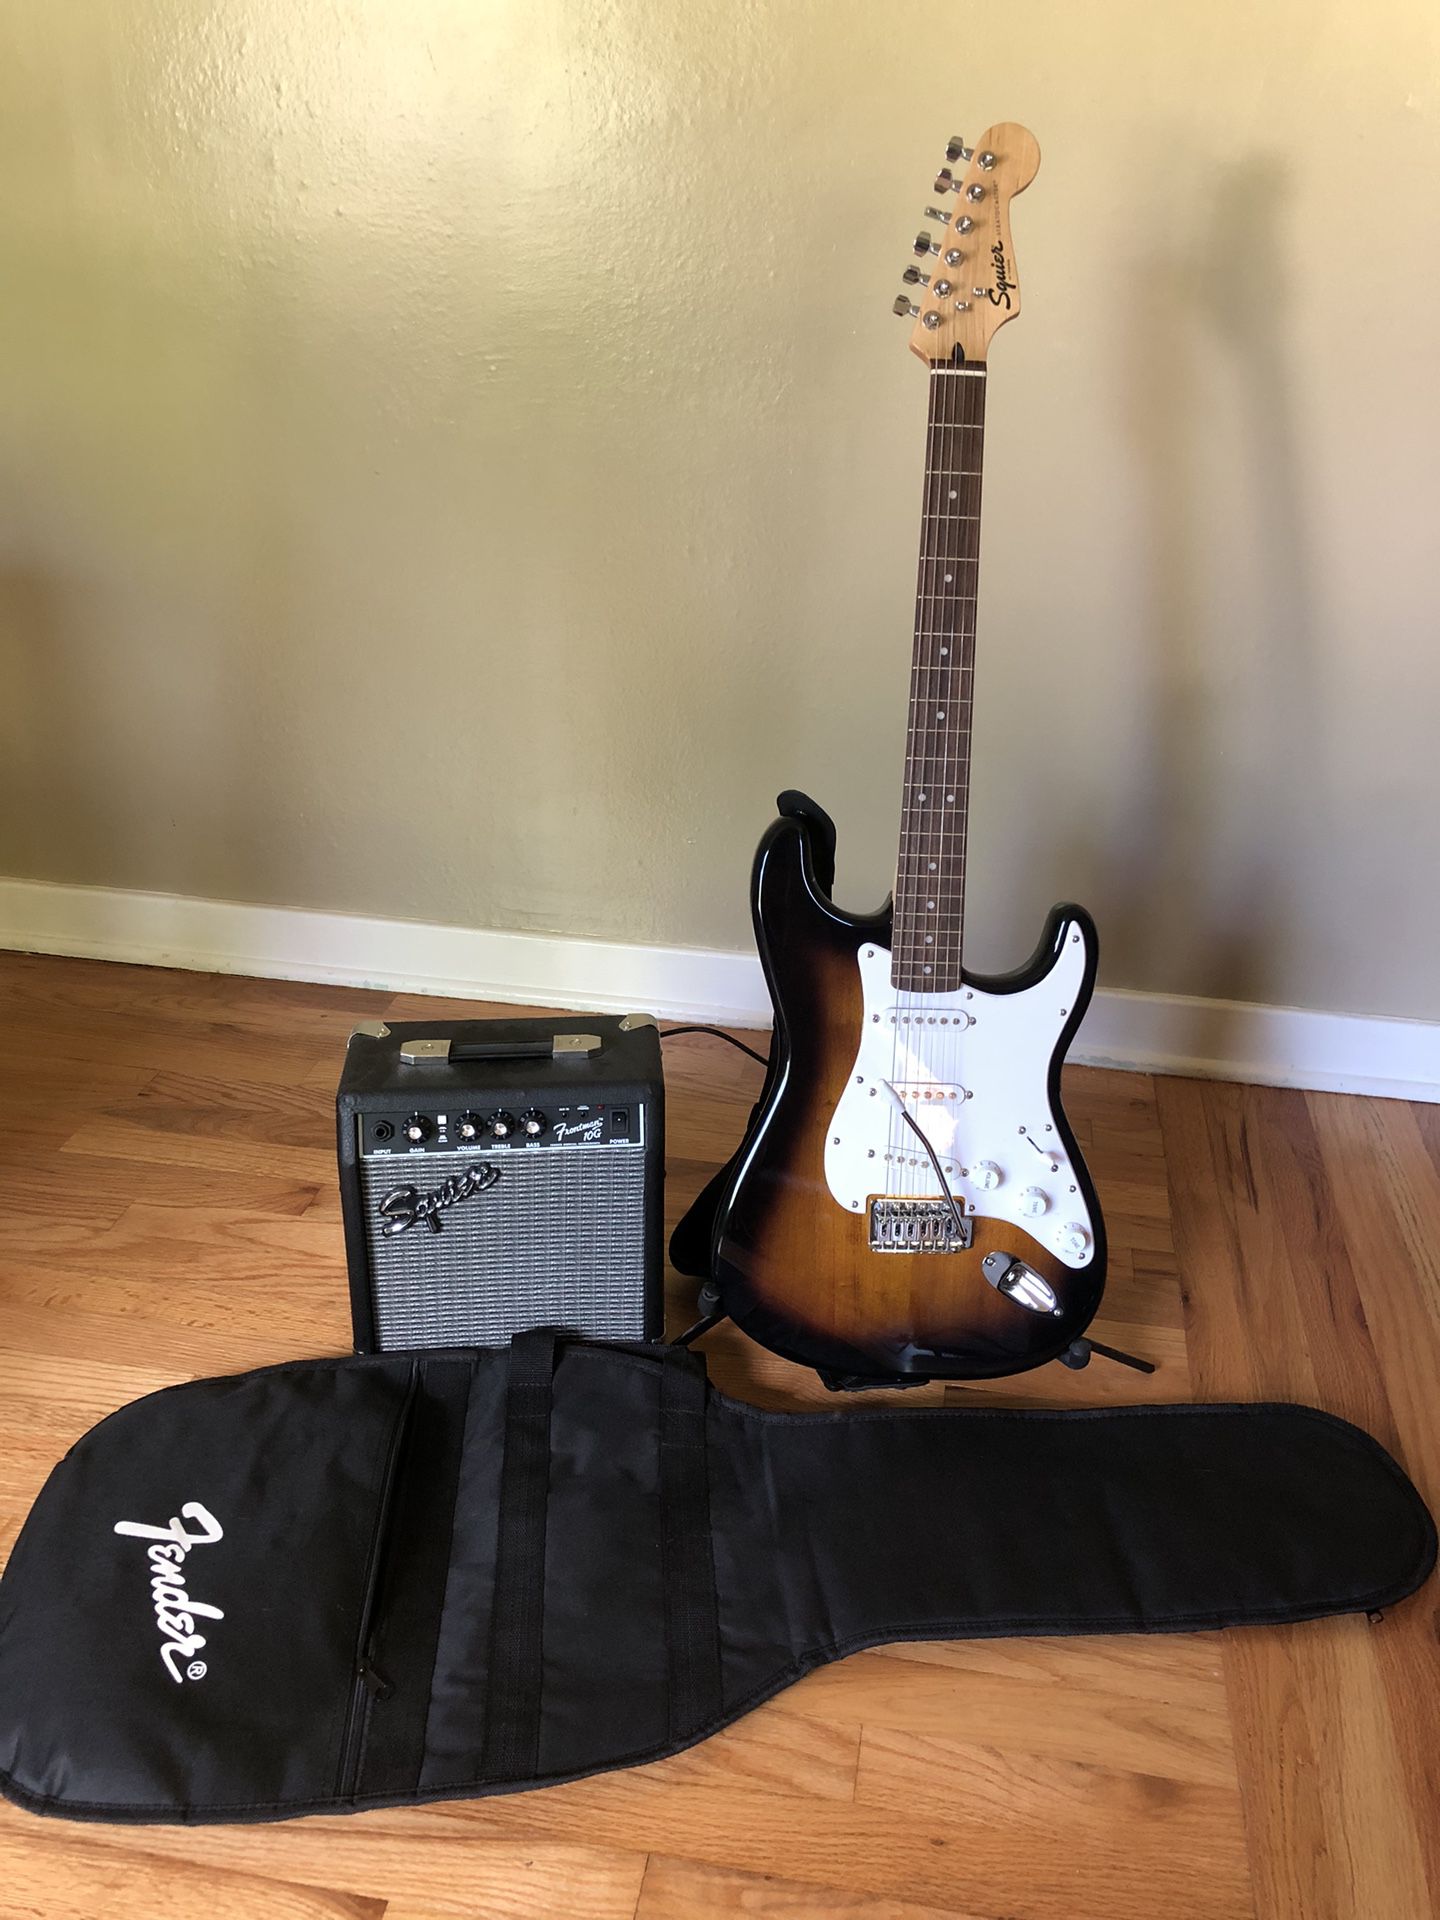 Fender Squier Stratocaster With Practice Amp